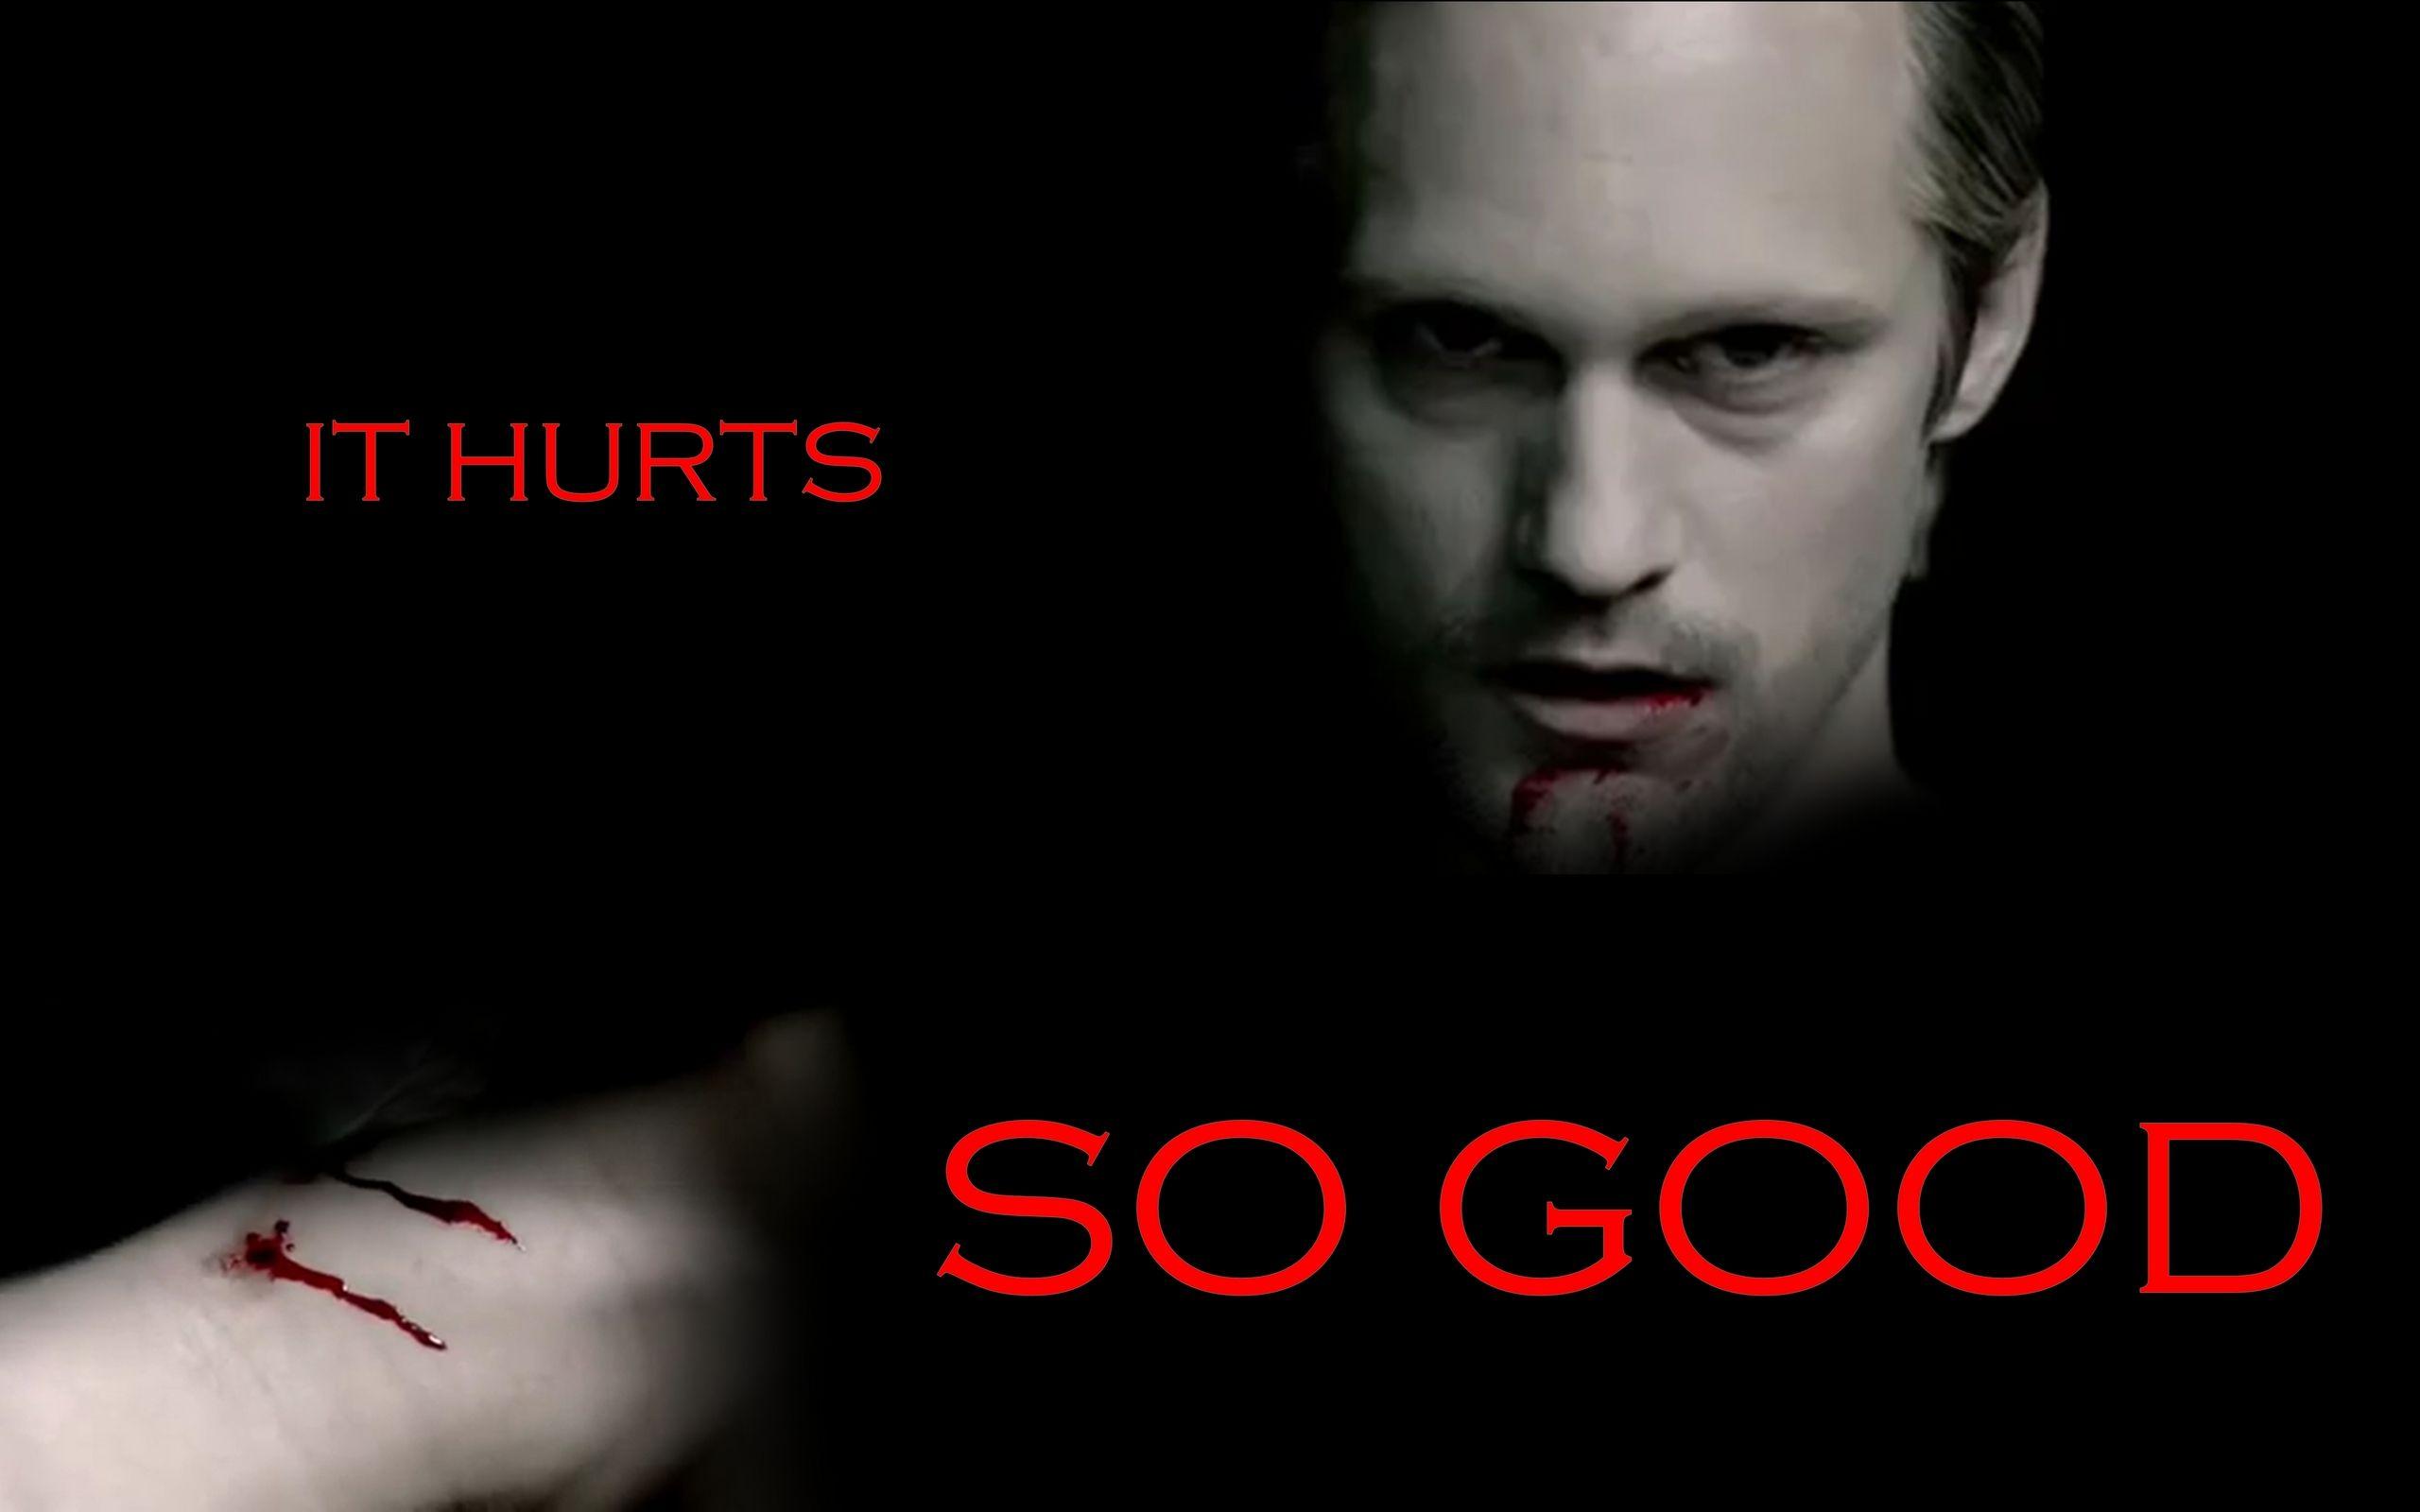 watch true blood. The epic sagas of HBO